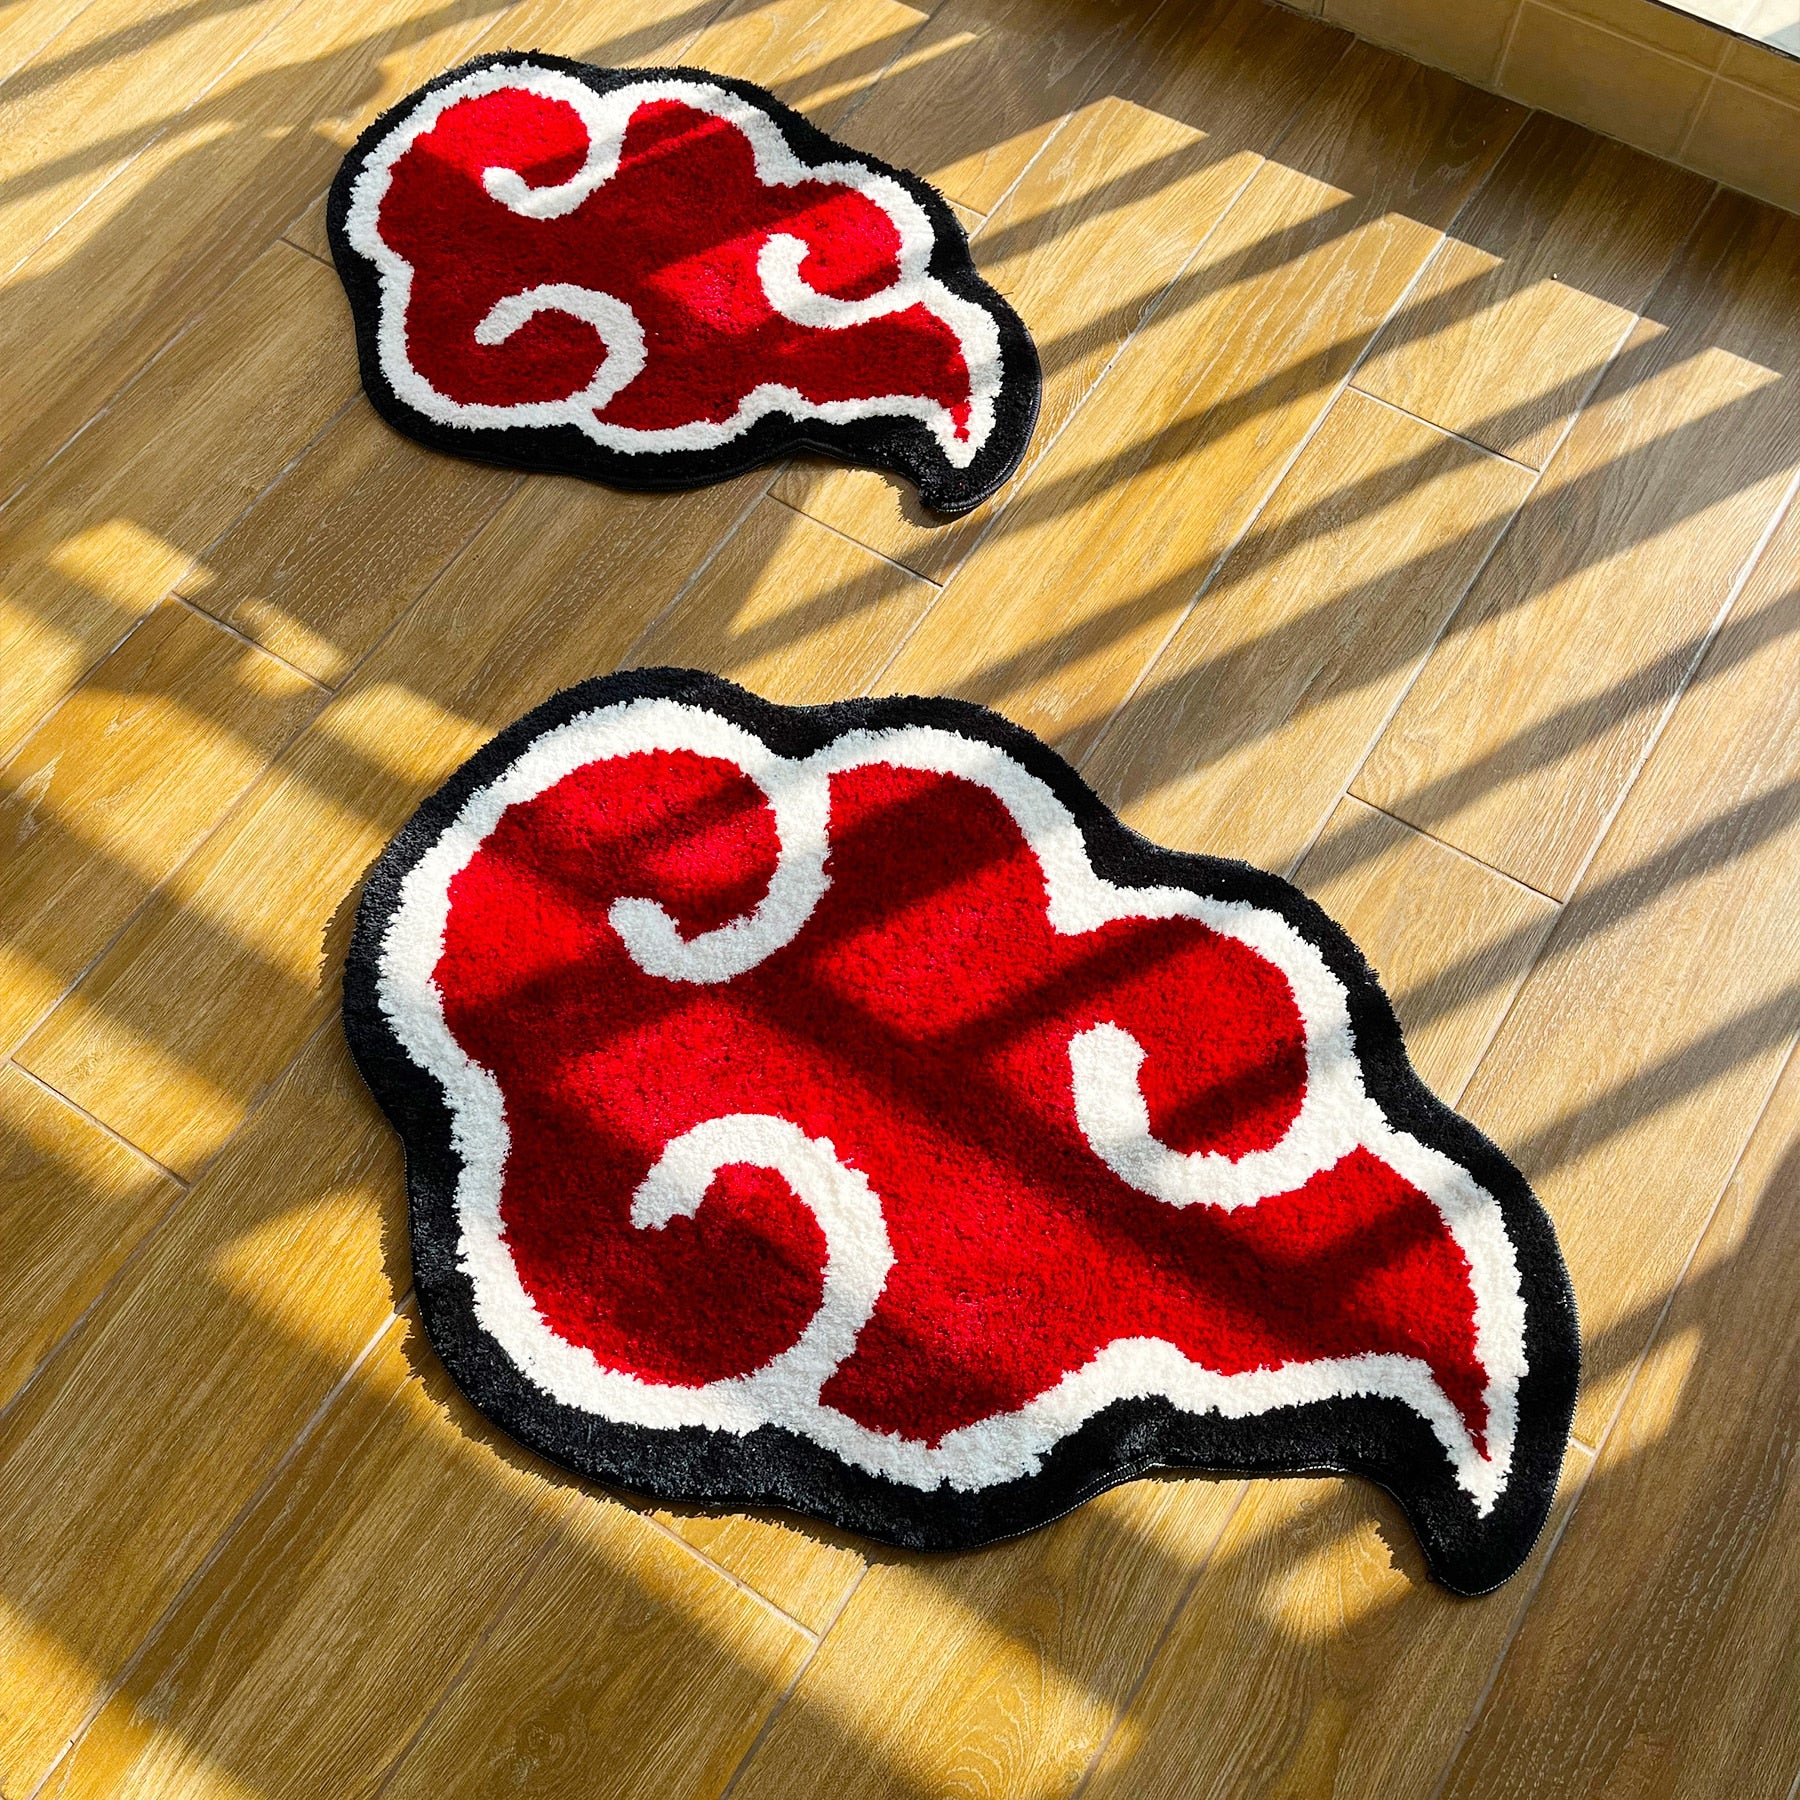 CORX Designs - Japanese Anime Red Cloud Rug - Review